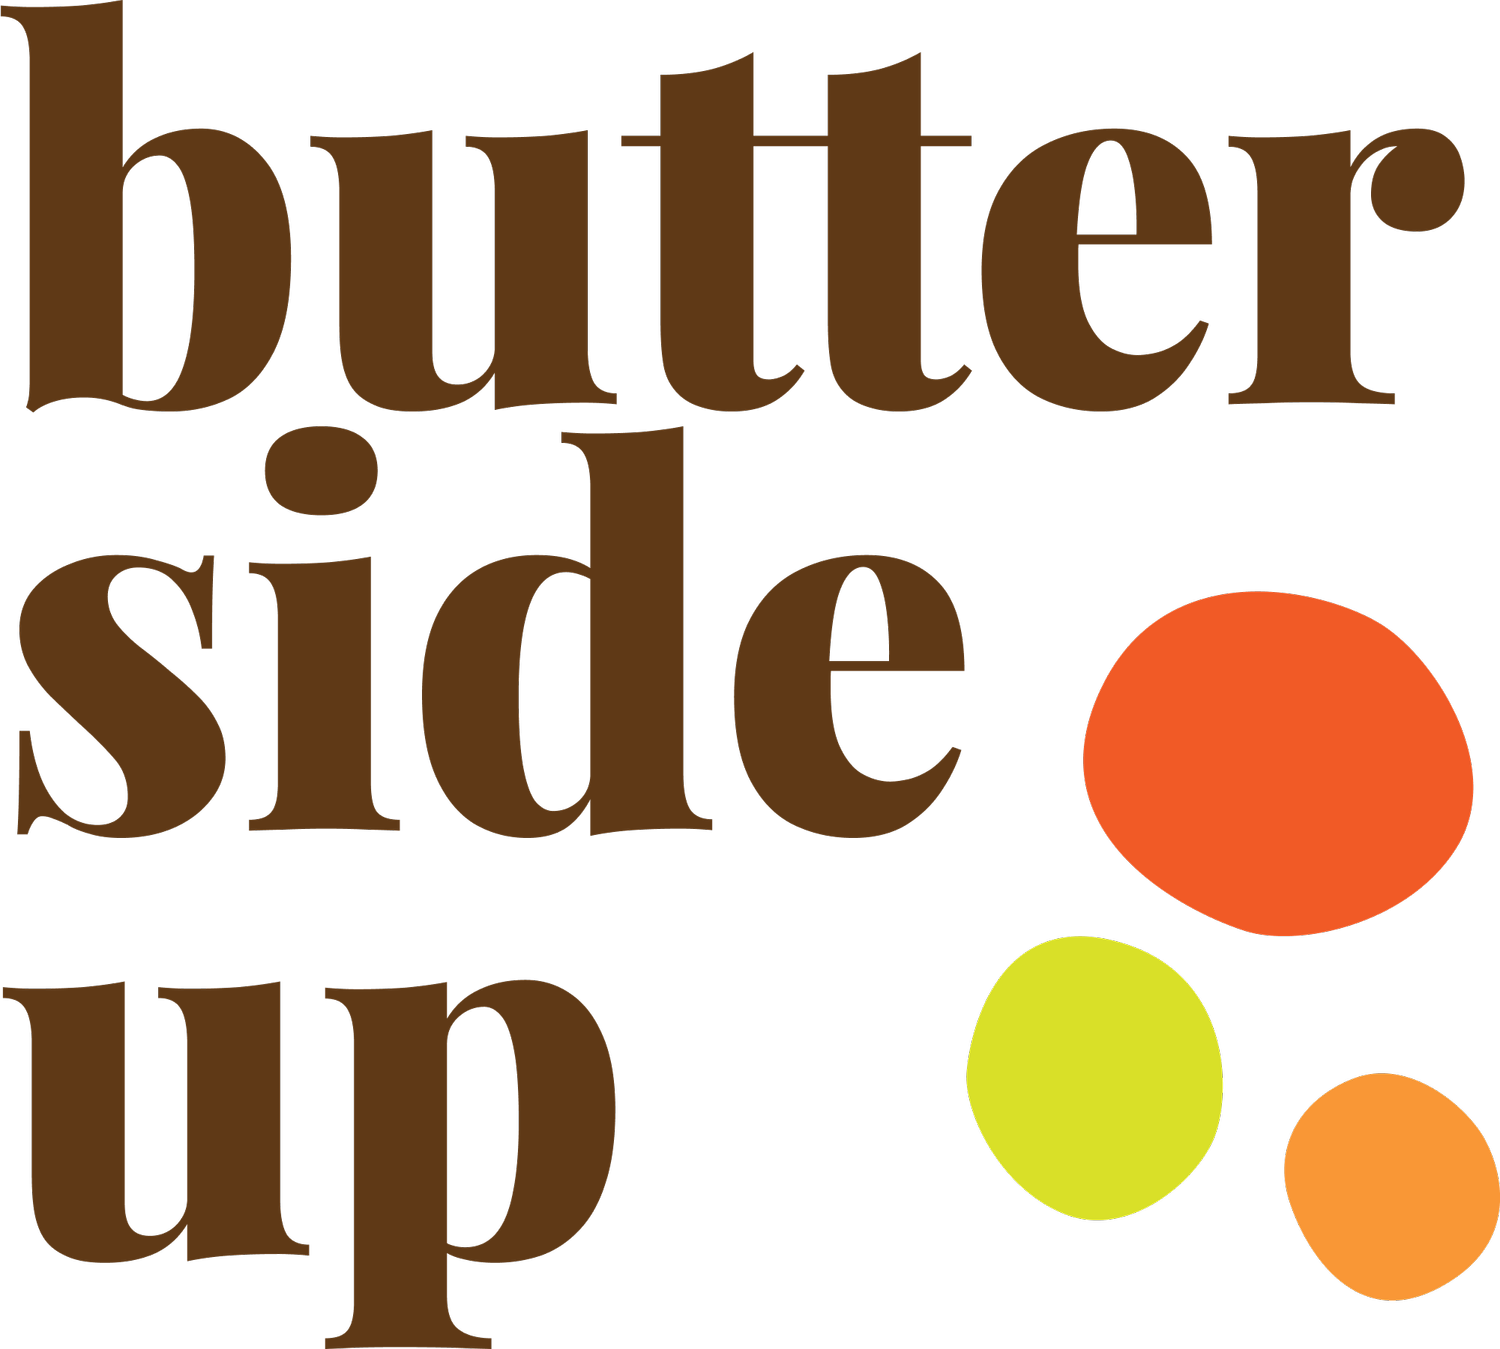 butter side up